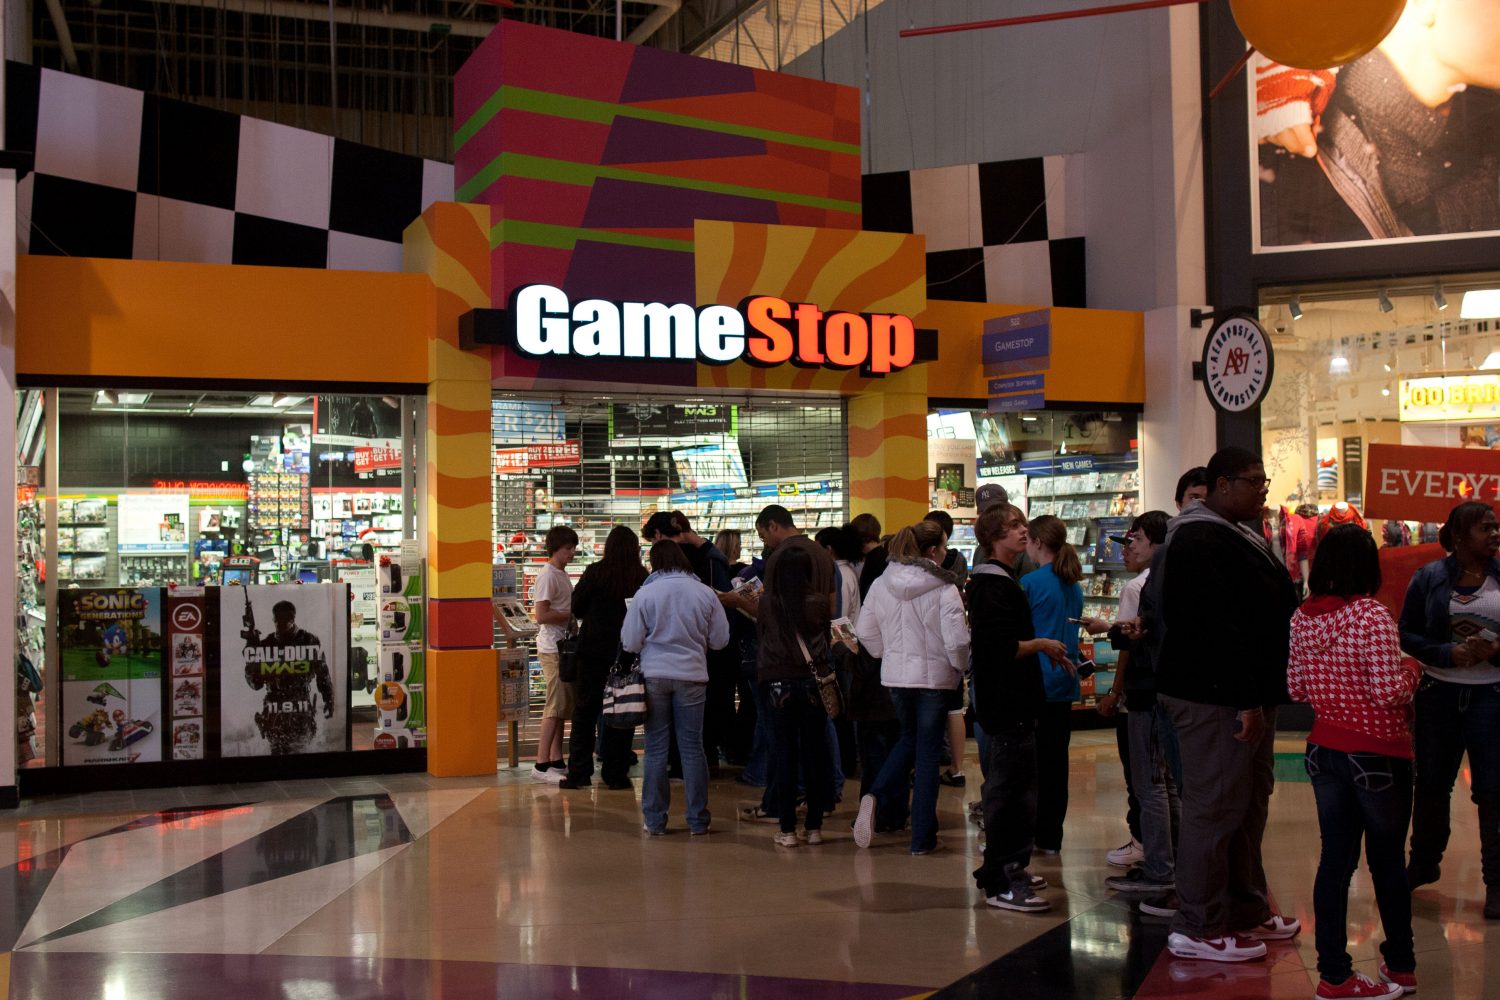 Gamestop closing 225 stores worldwide and other stories in icymi, the geekly roundup #3